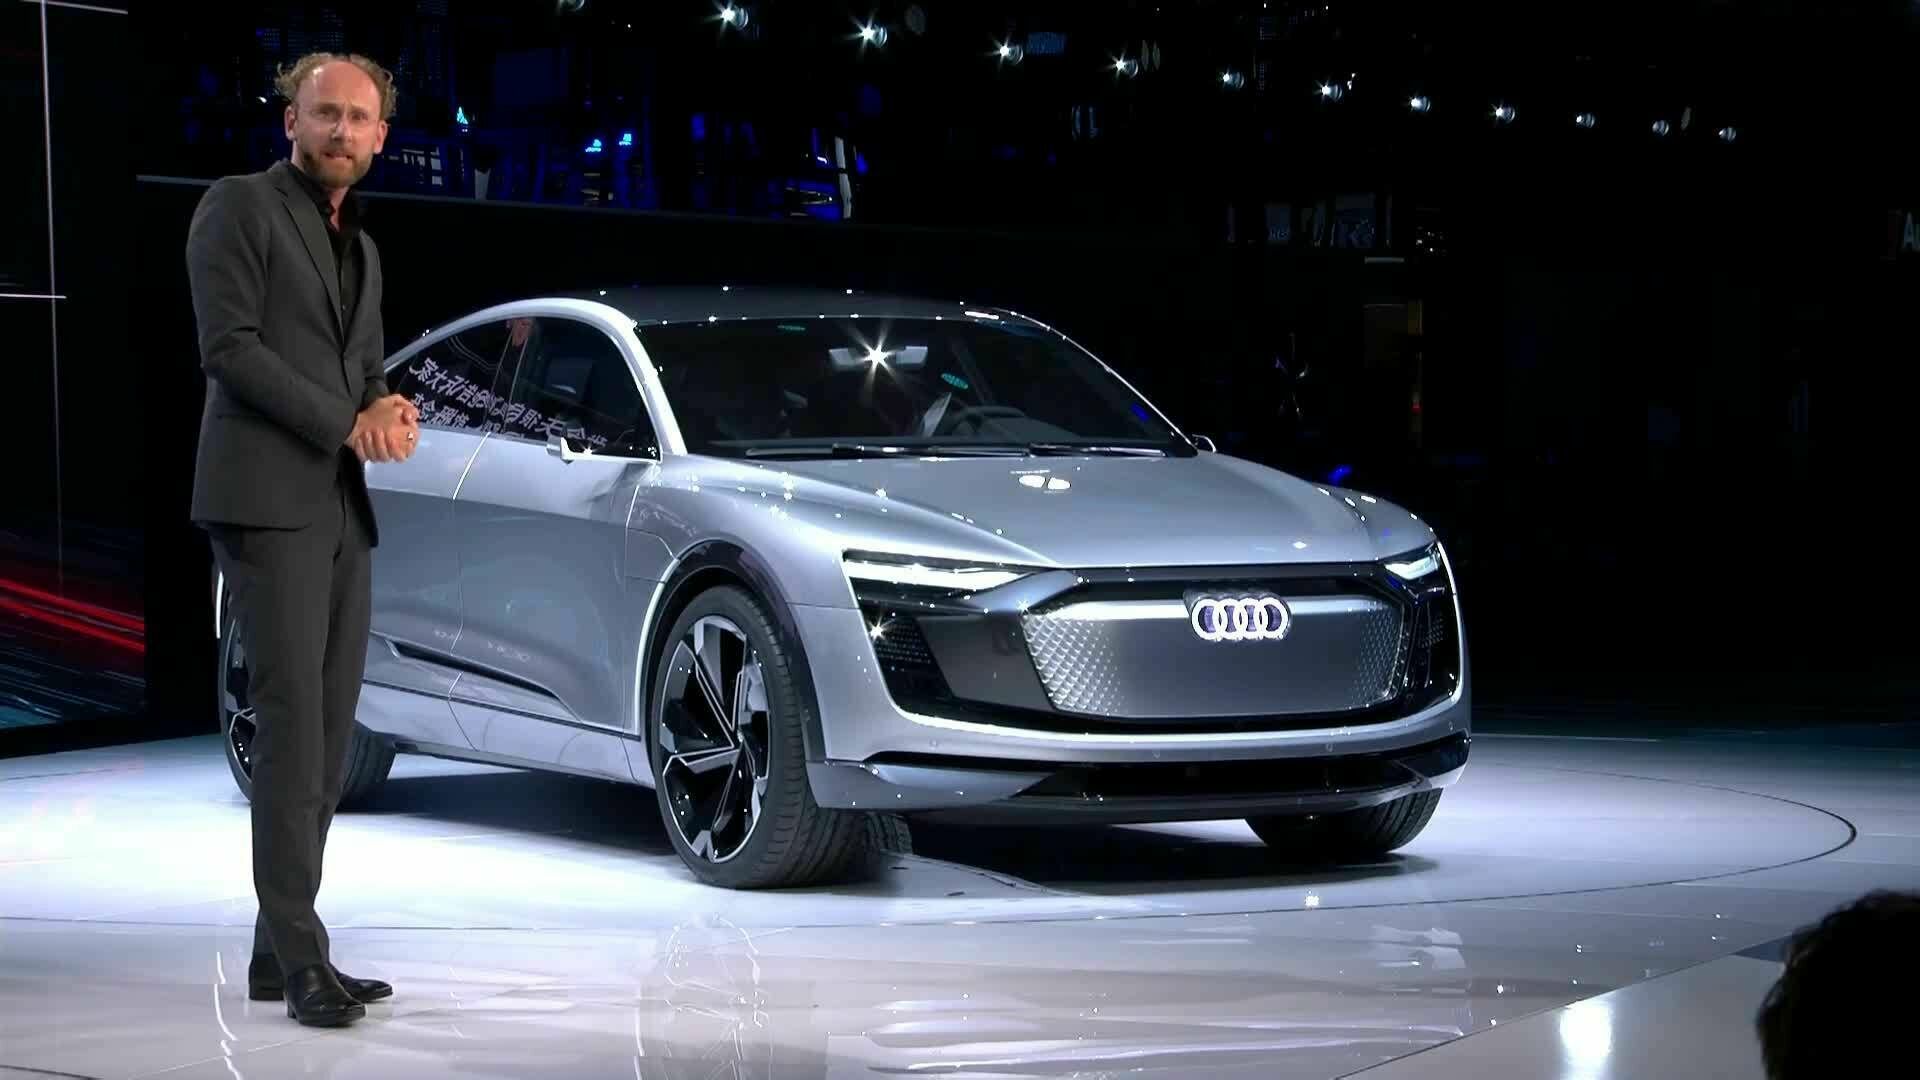 AUDI AG press conference in Shanghai - highlights